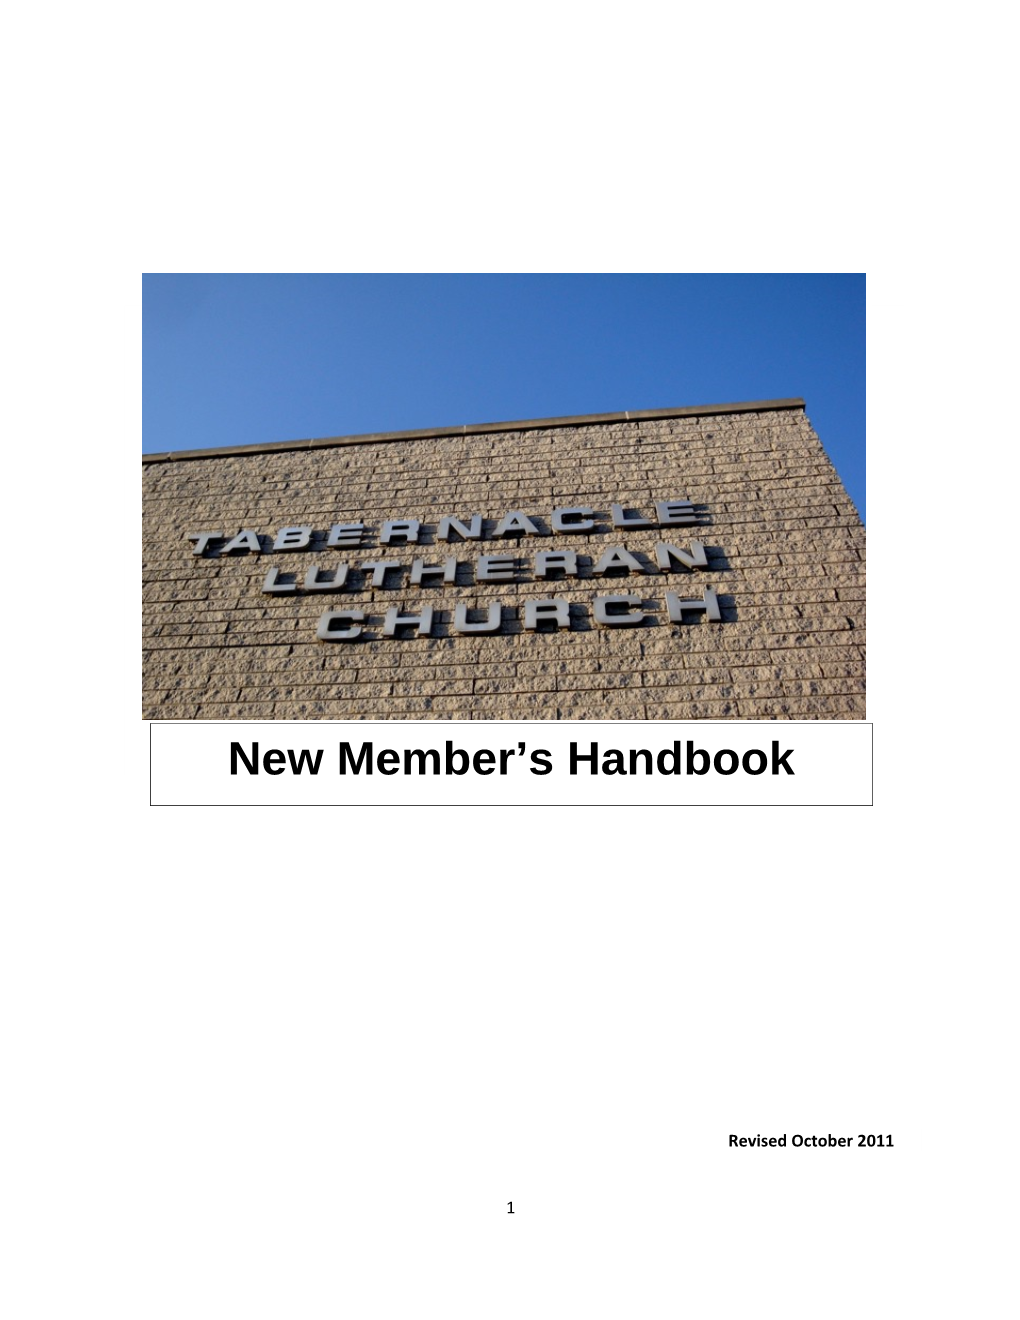 On Behalf of Our Officers and Members, I Welcome You to the Tabernacle Evangelical Lutheran